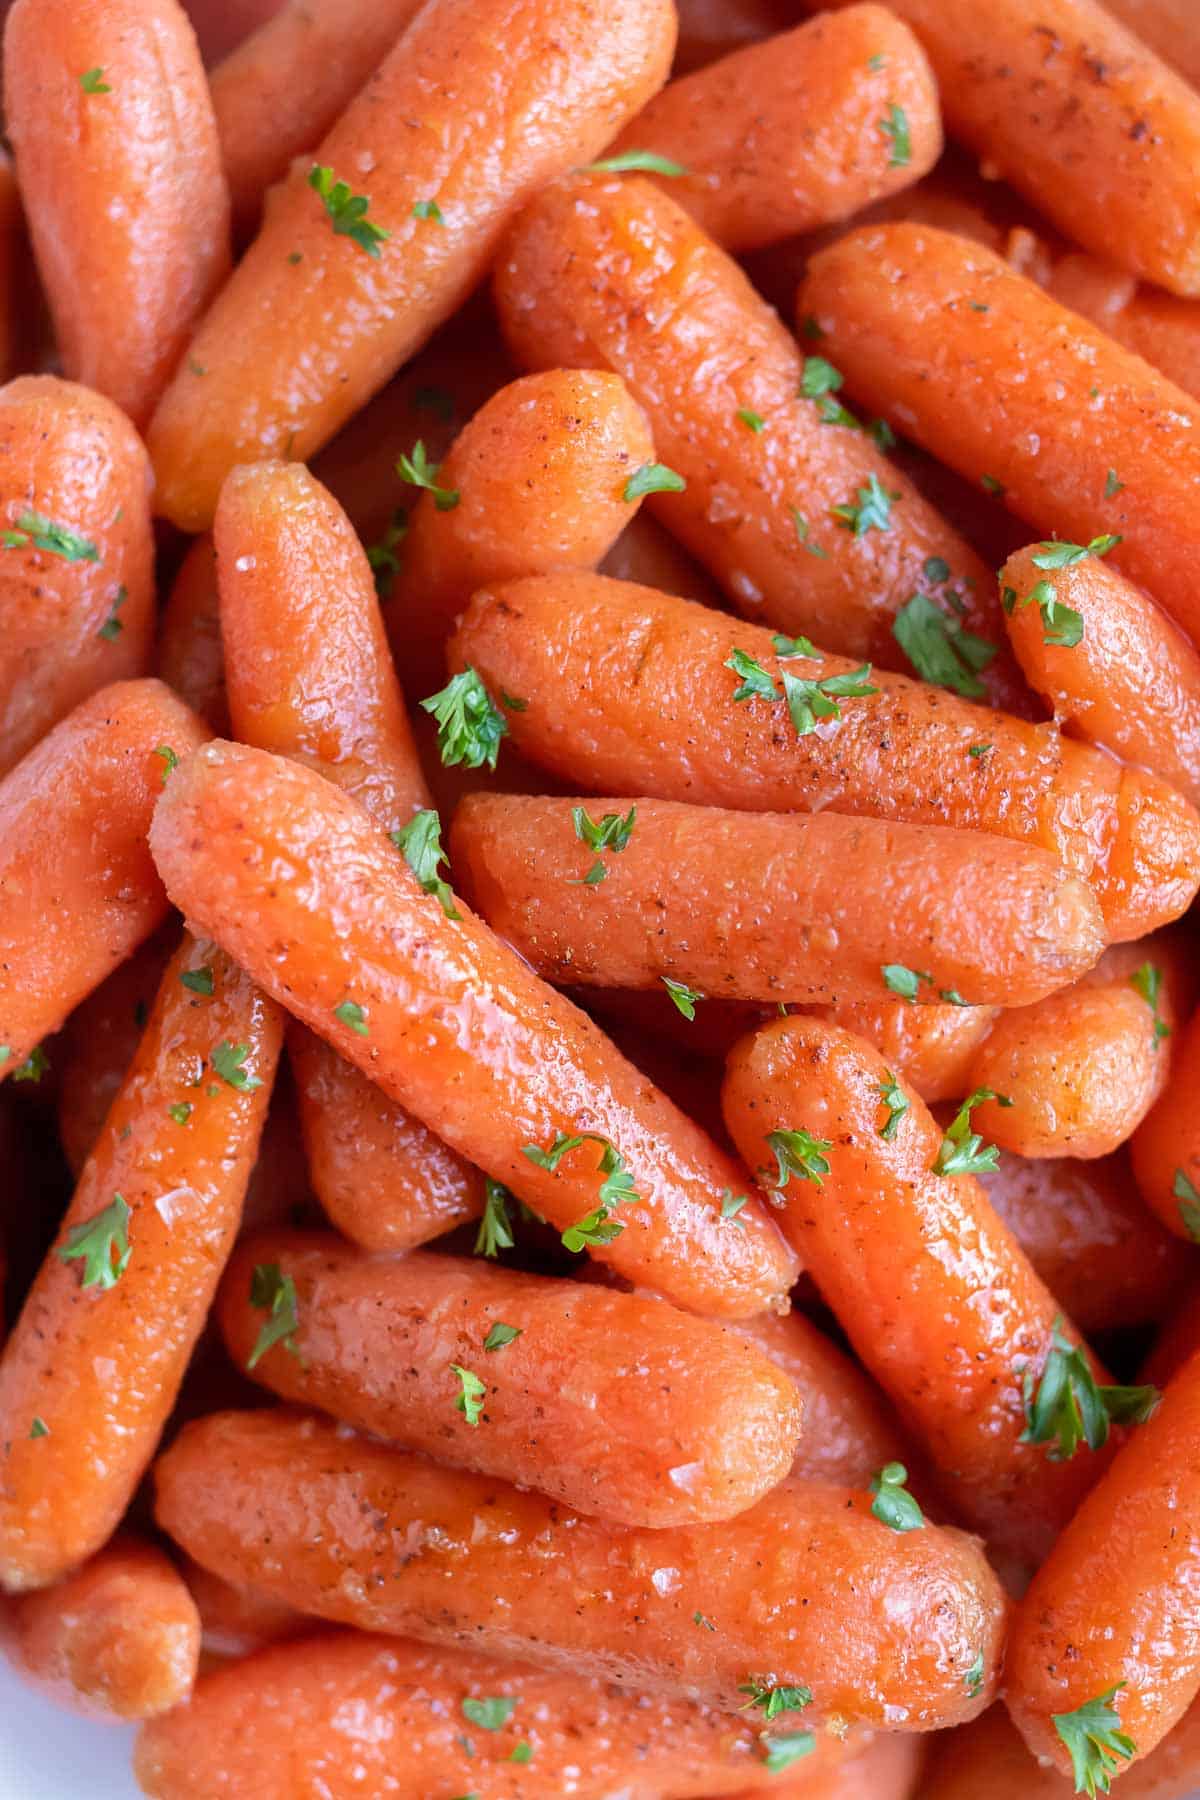 A pile of tender instant pot glazed carrots are shown.